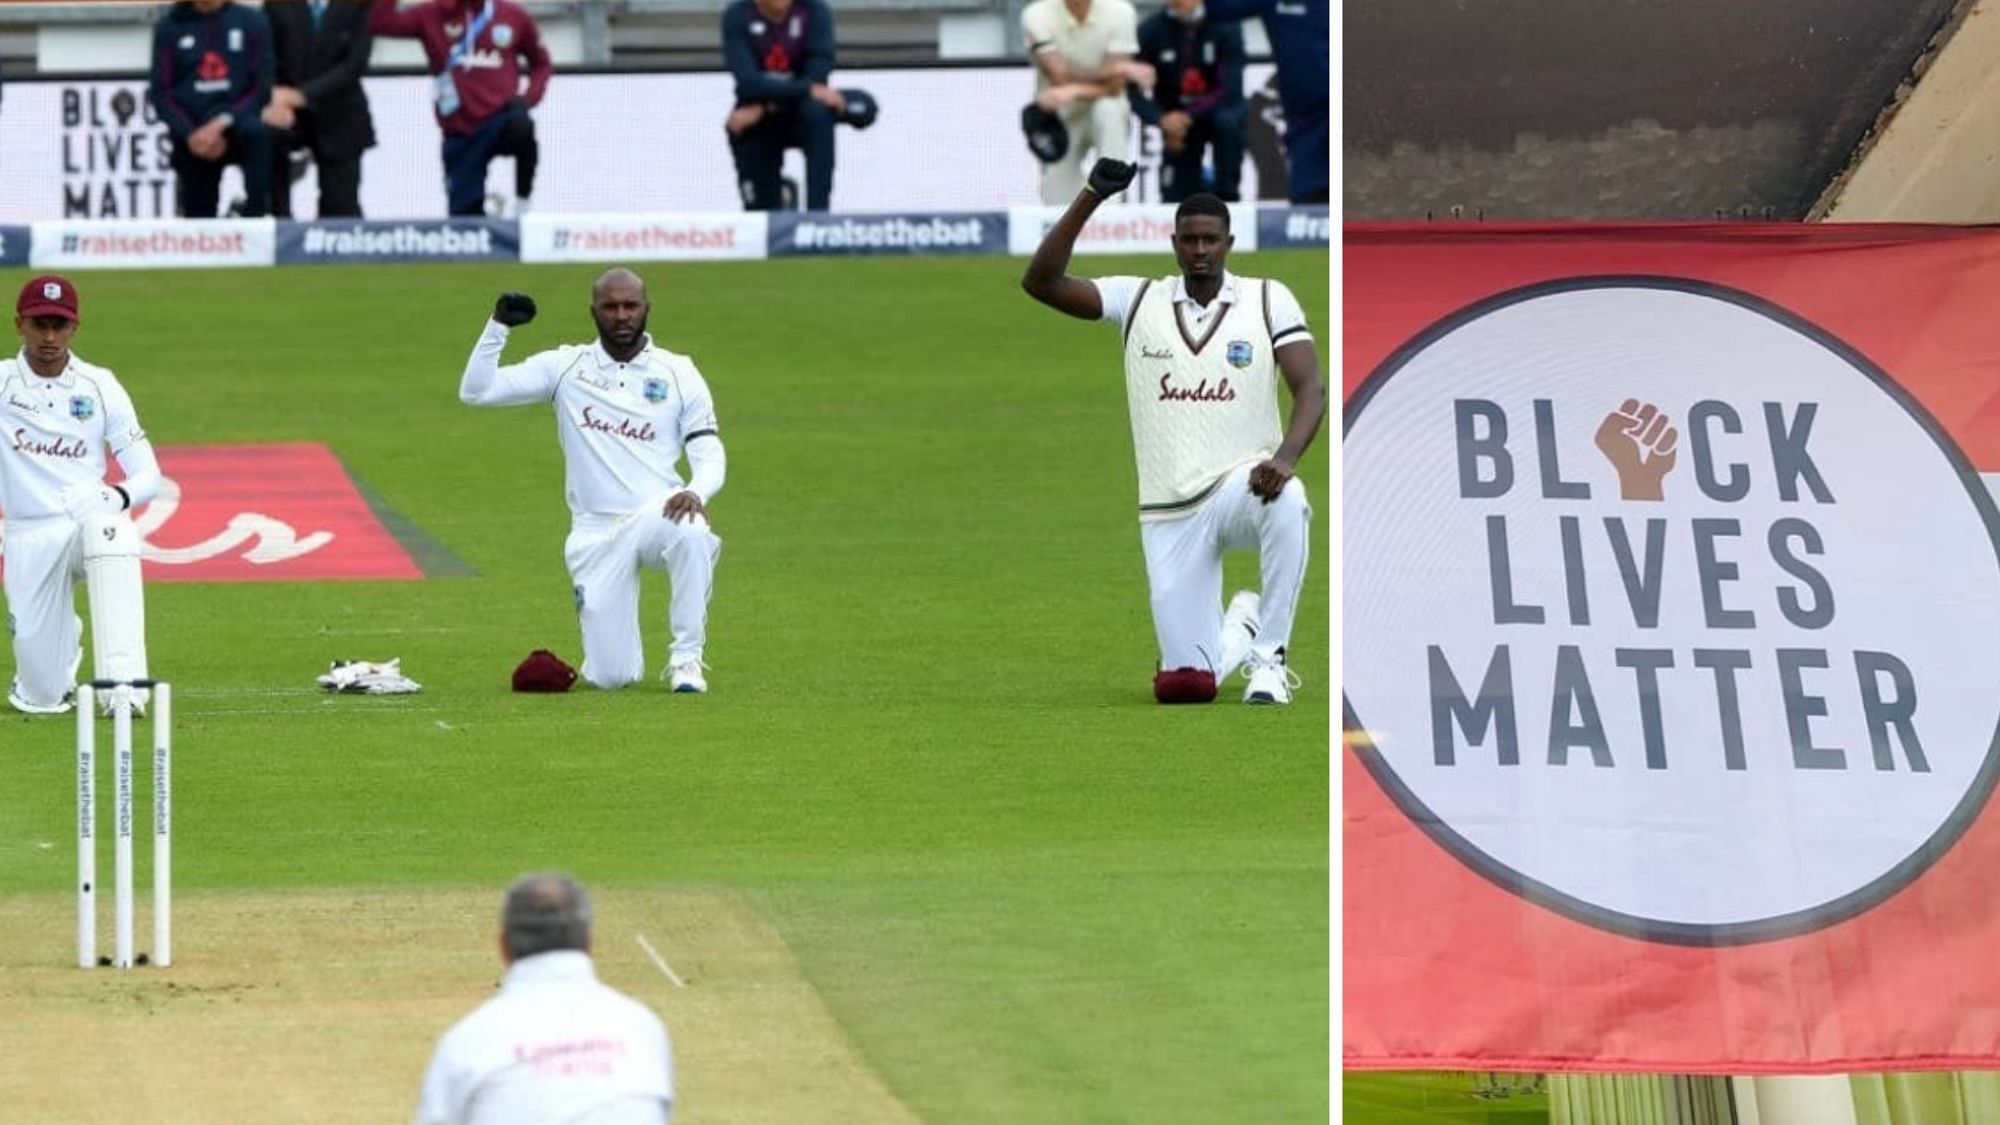 West Indies and England players took a knee before the start of the first Test, in support of the Black Lives Matter movement.